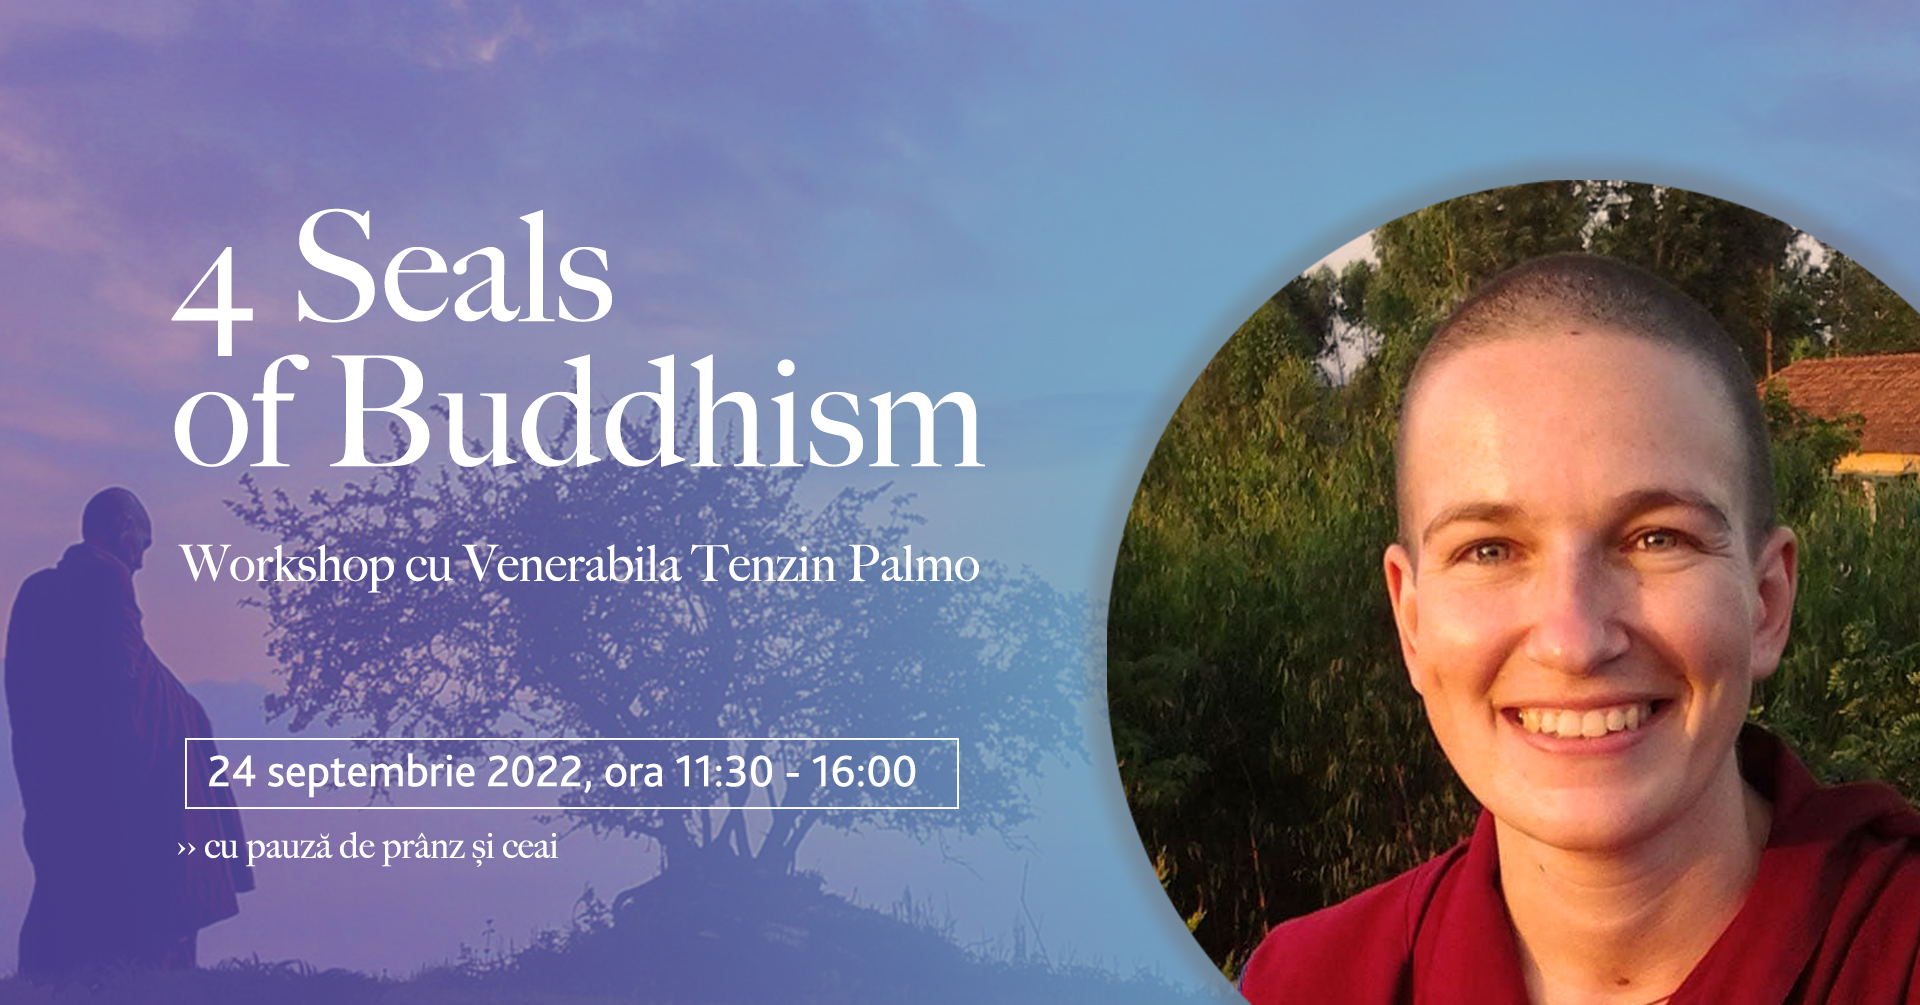 4 Seals of Buddhism with ven Tenzin Palmo